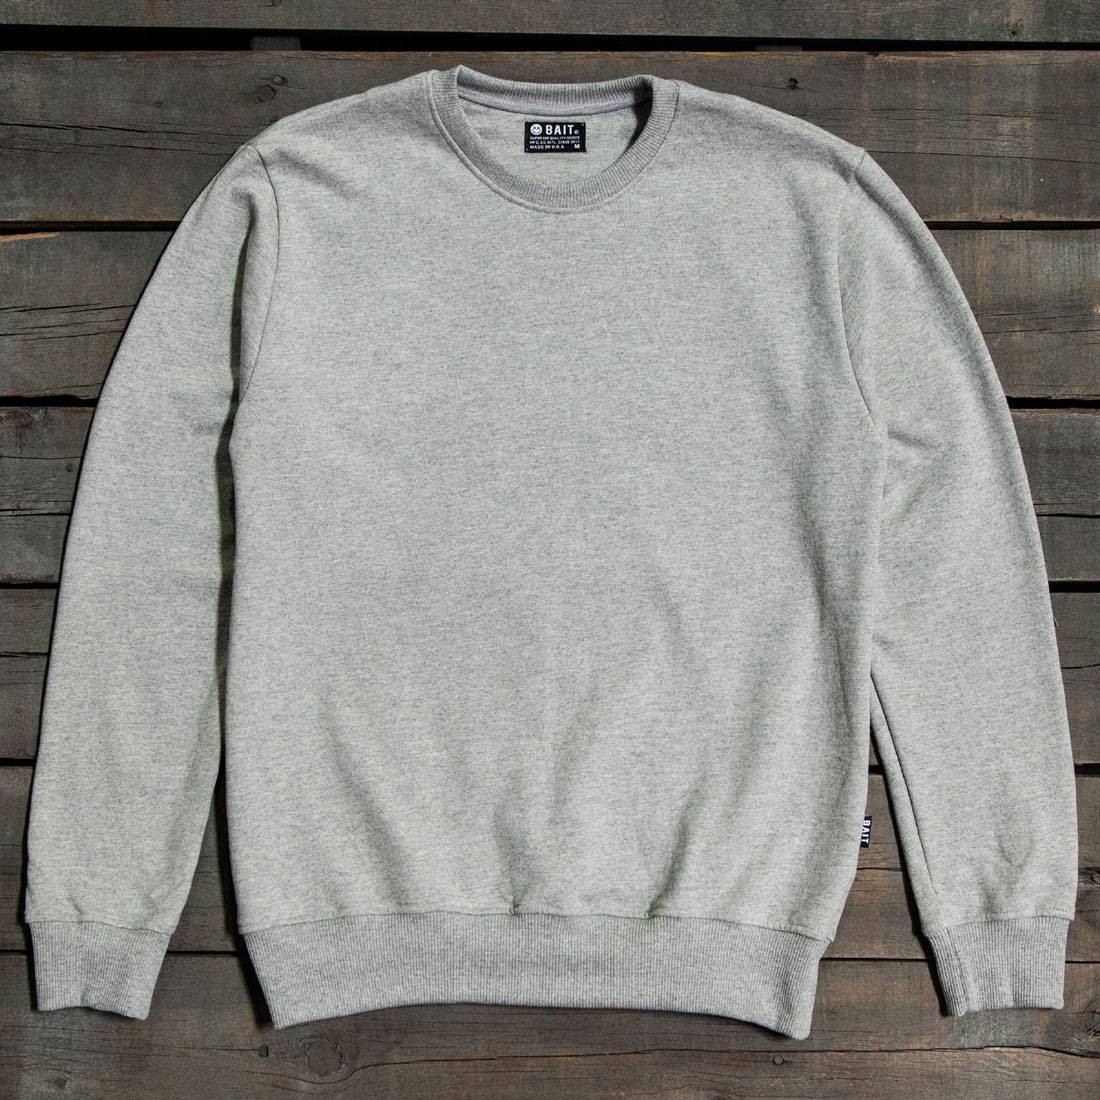 Cheap Cerbe Jordan Outlet Men Premium Crew Neck Sweater - Made in Los Angeles (gray / heather)